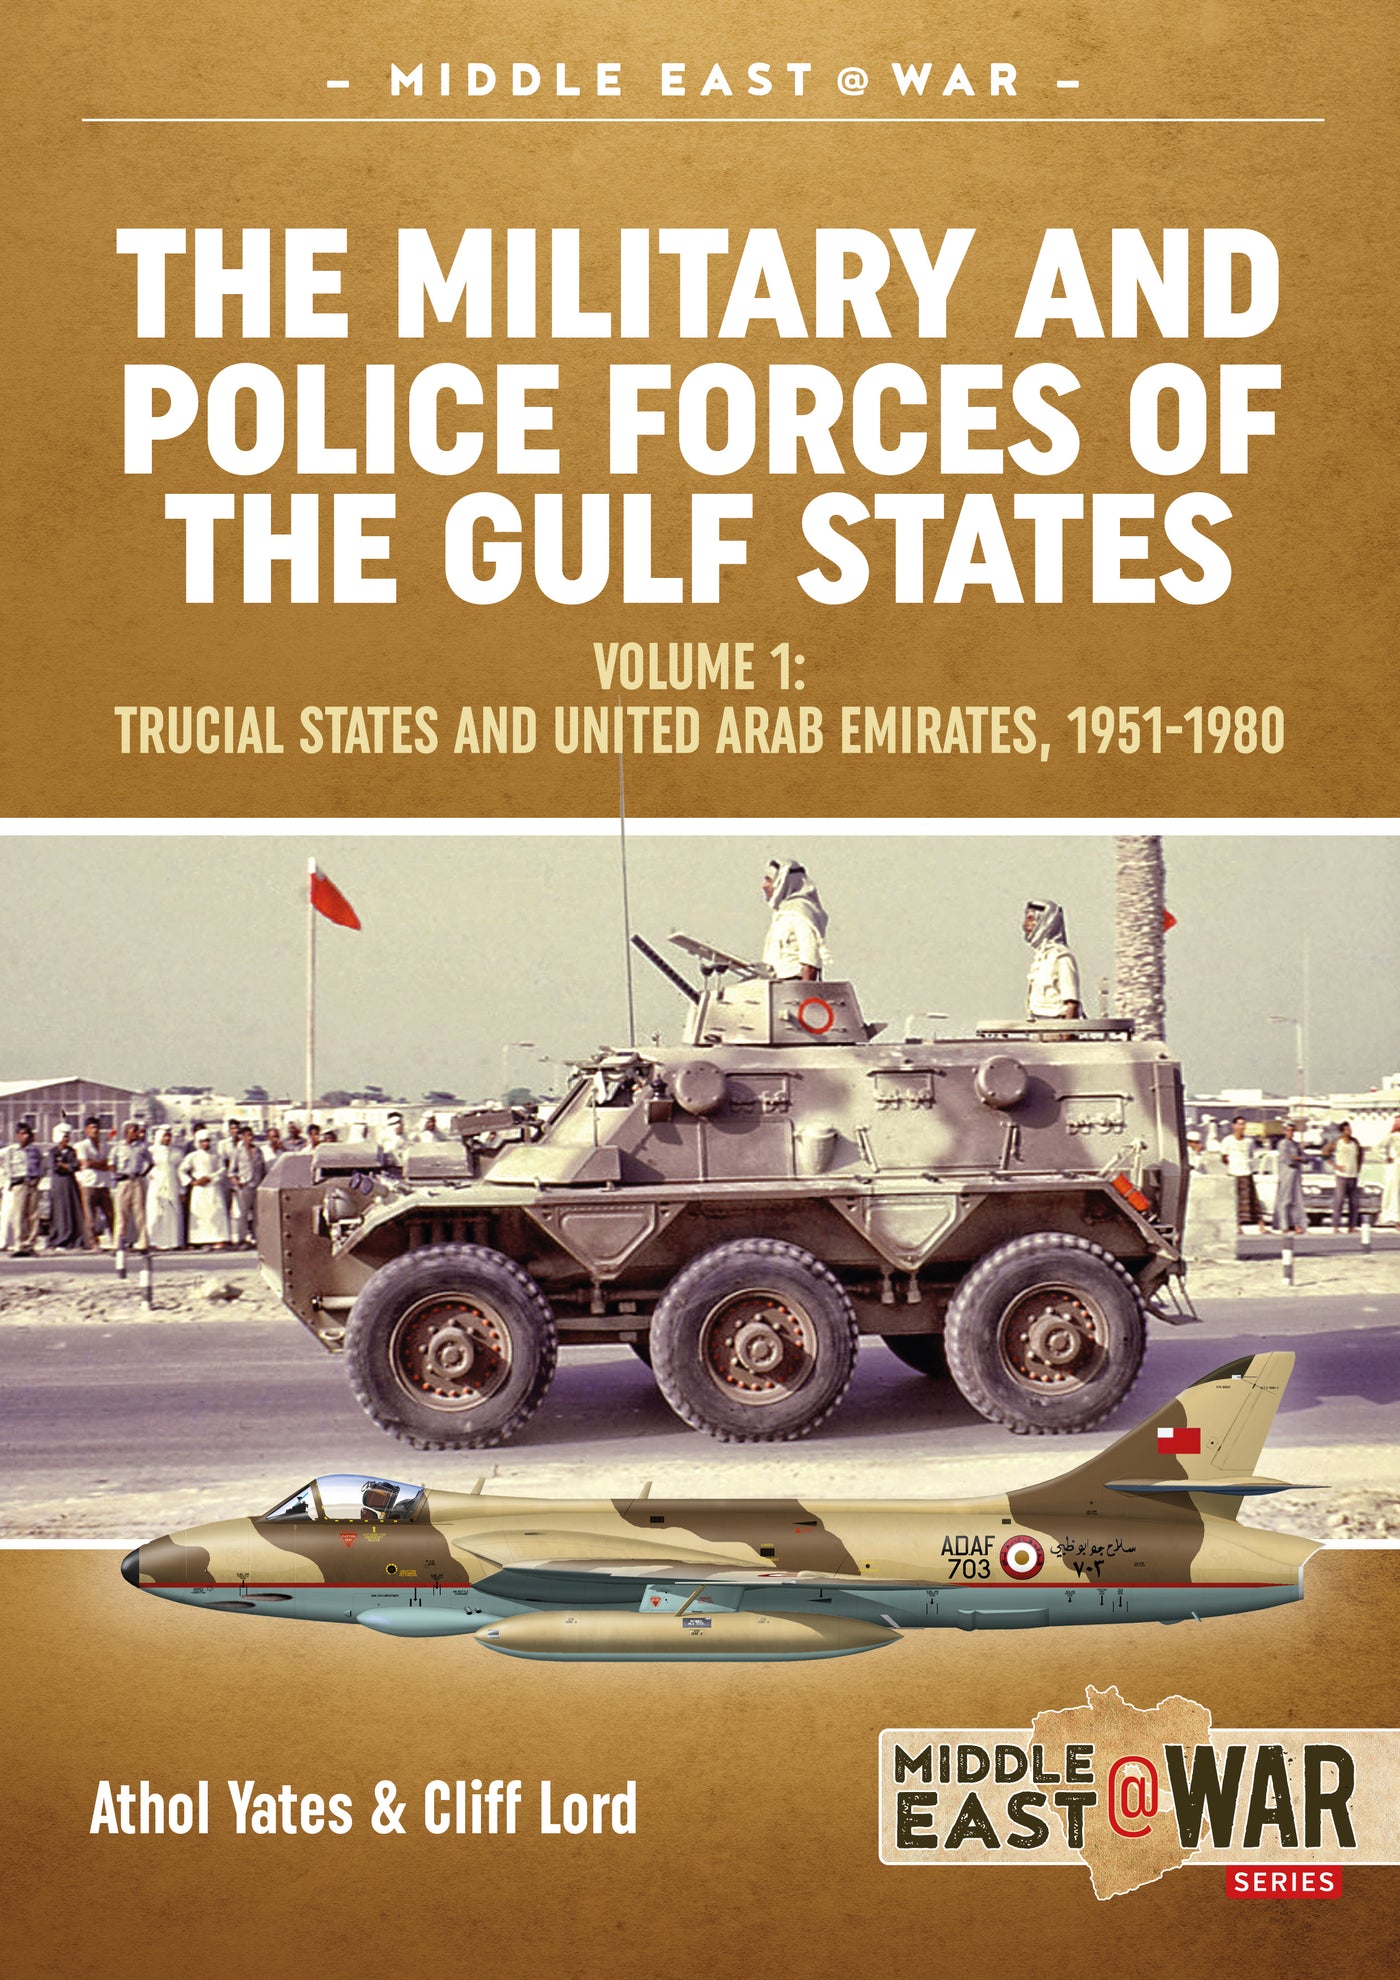 The Military and Police Forces of the Gulf States. Volume 1